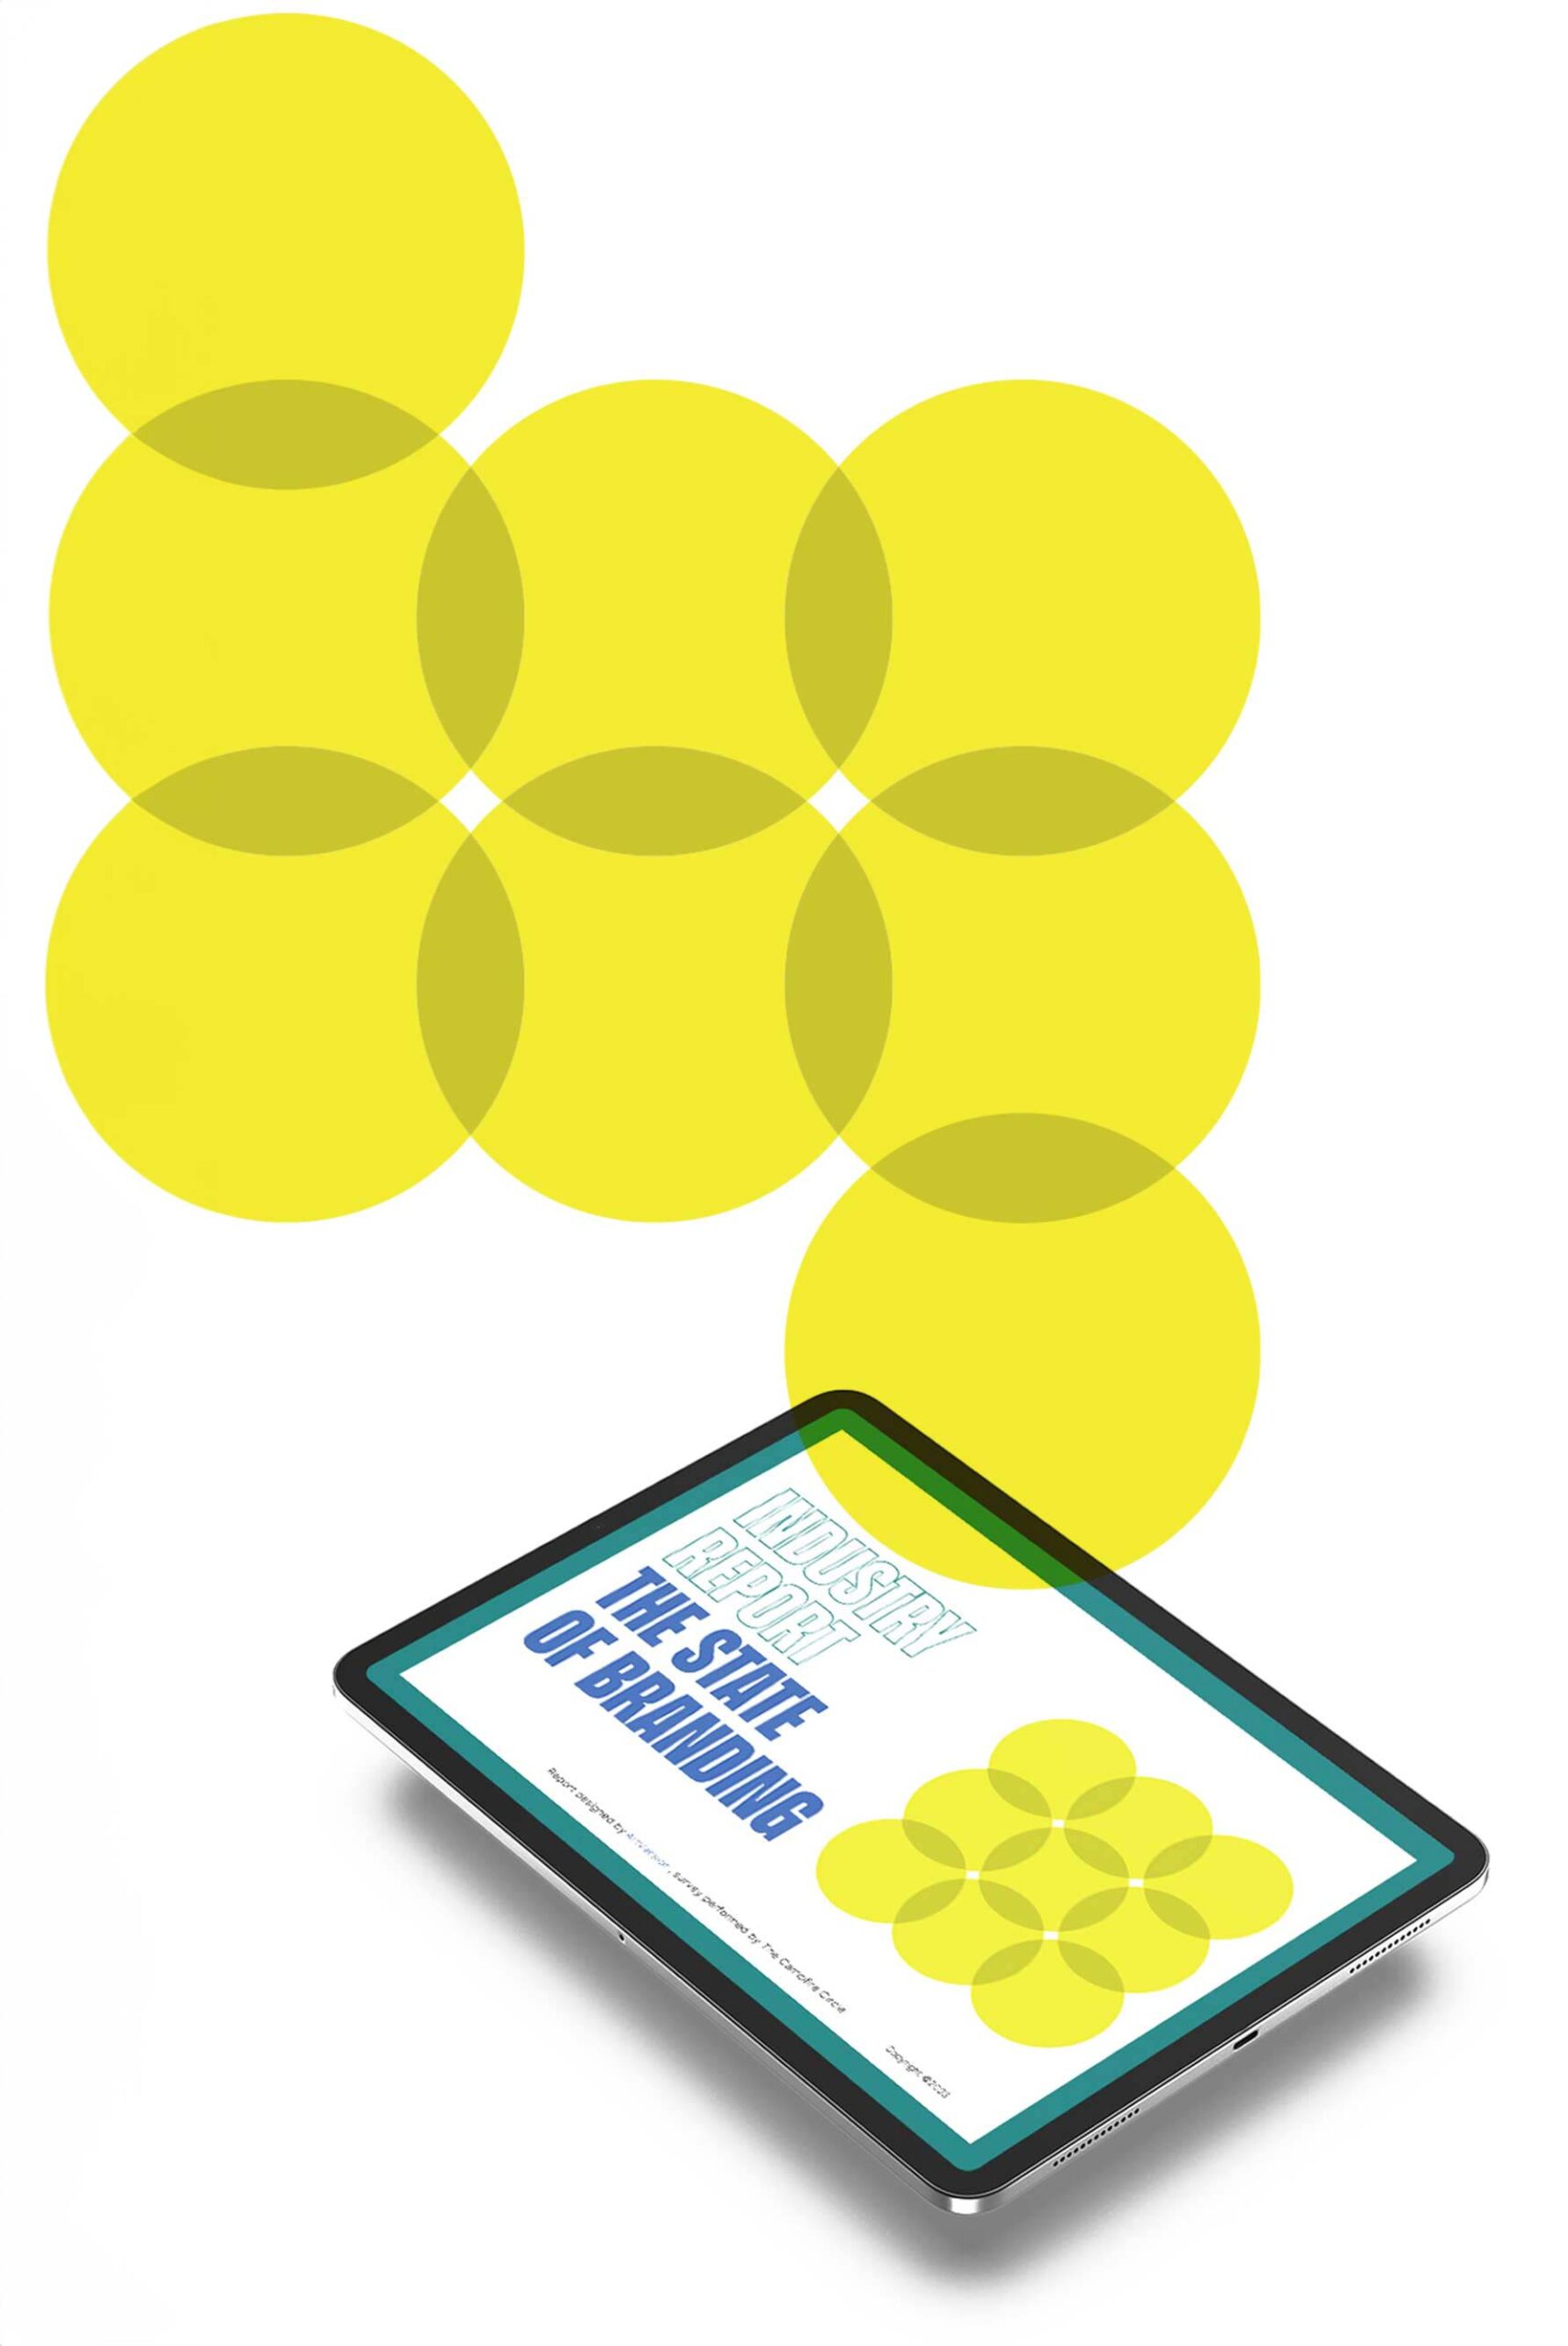 A branding industry report that features yellow, circular graphic elements.